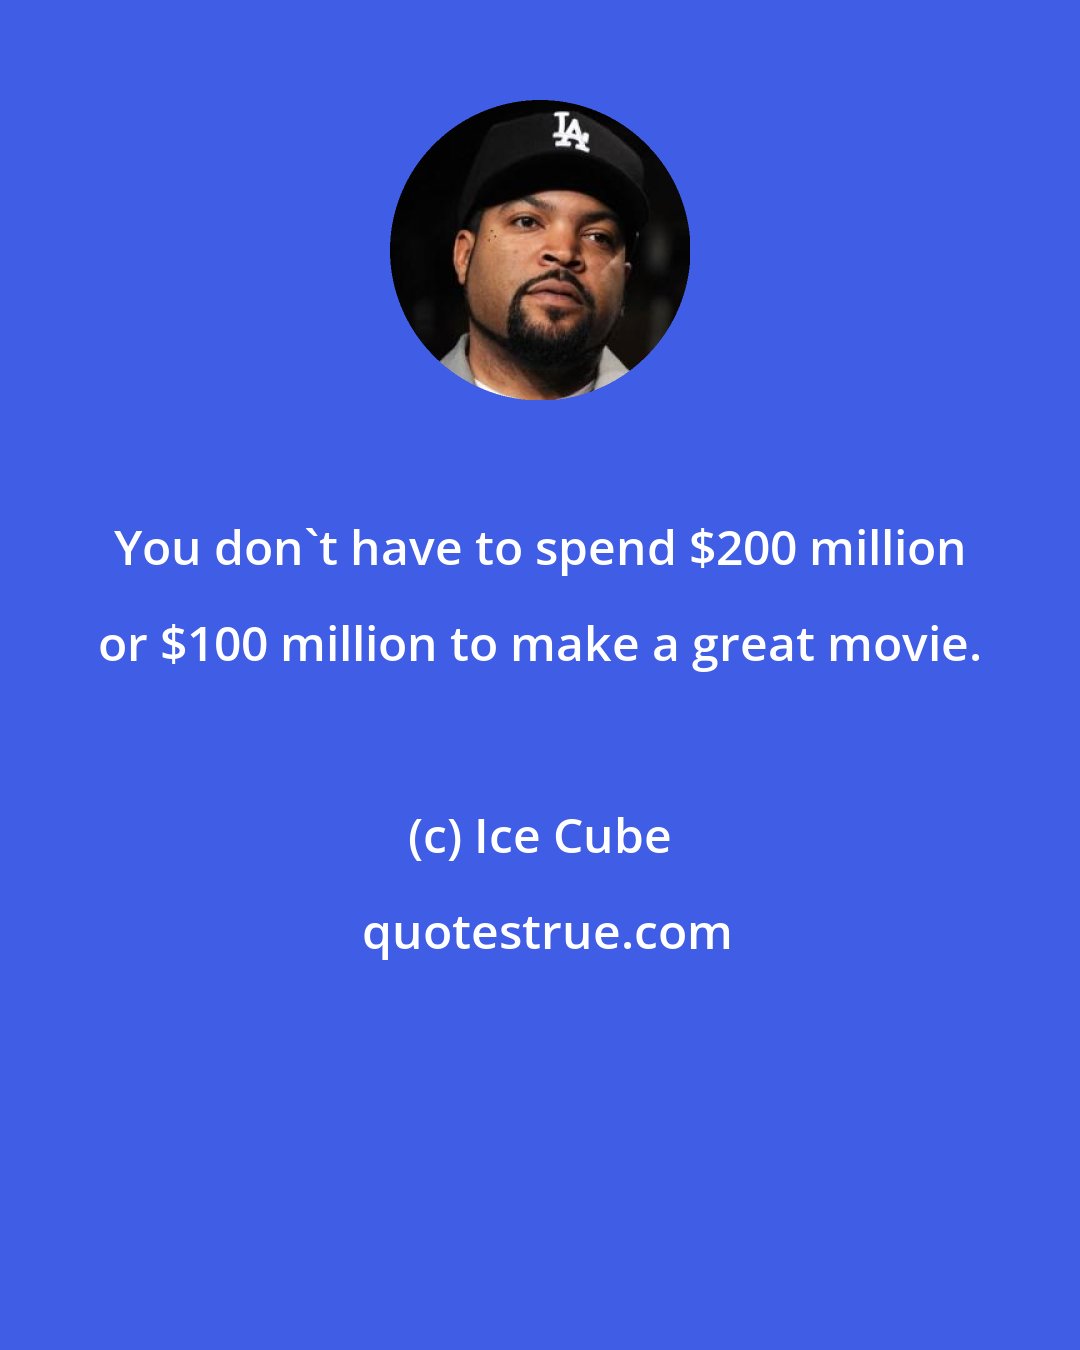 Ice Cube: You don't have to spend $200 million or $100 million to make a great movie.